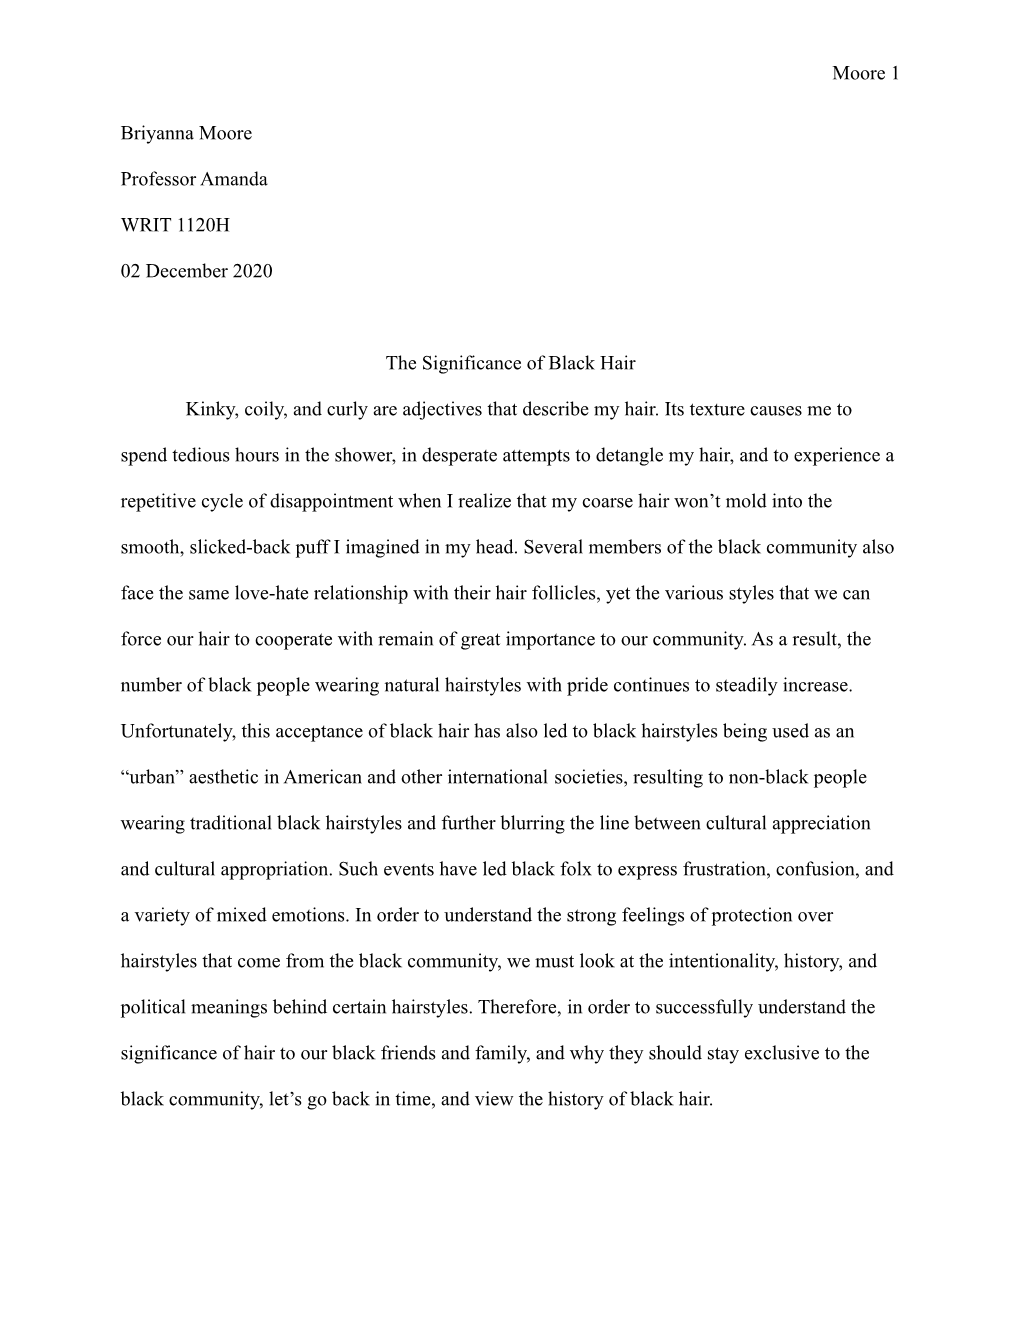 Final Research Project Essay